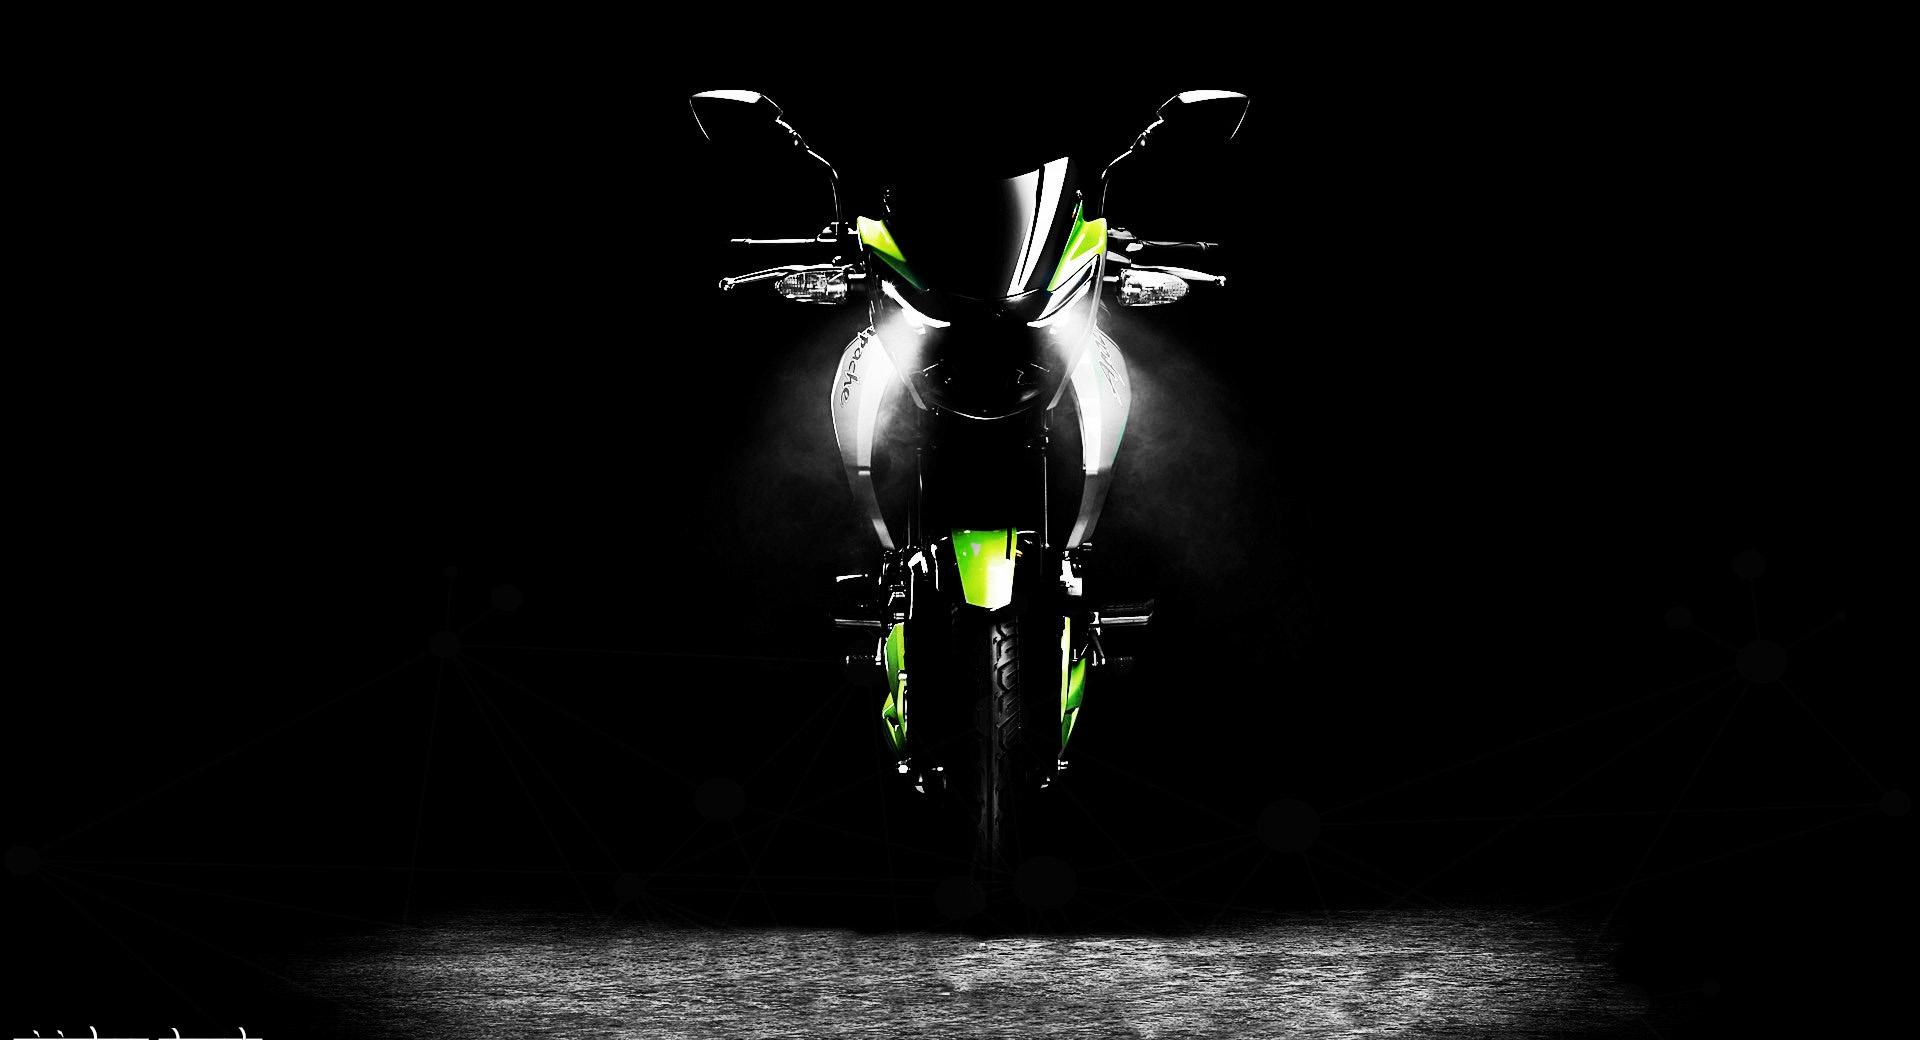 Apache RTR 160 wallpapers HD quality